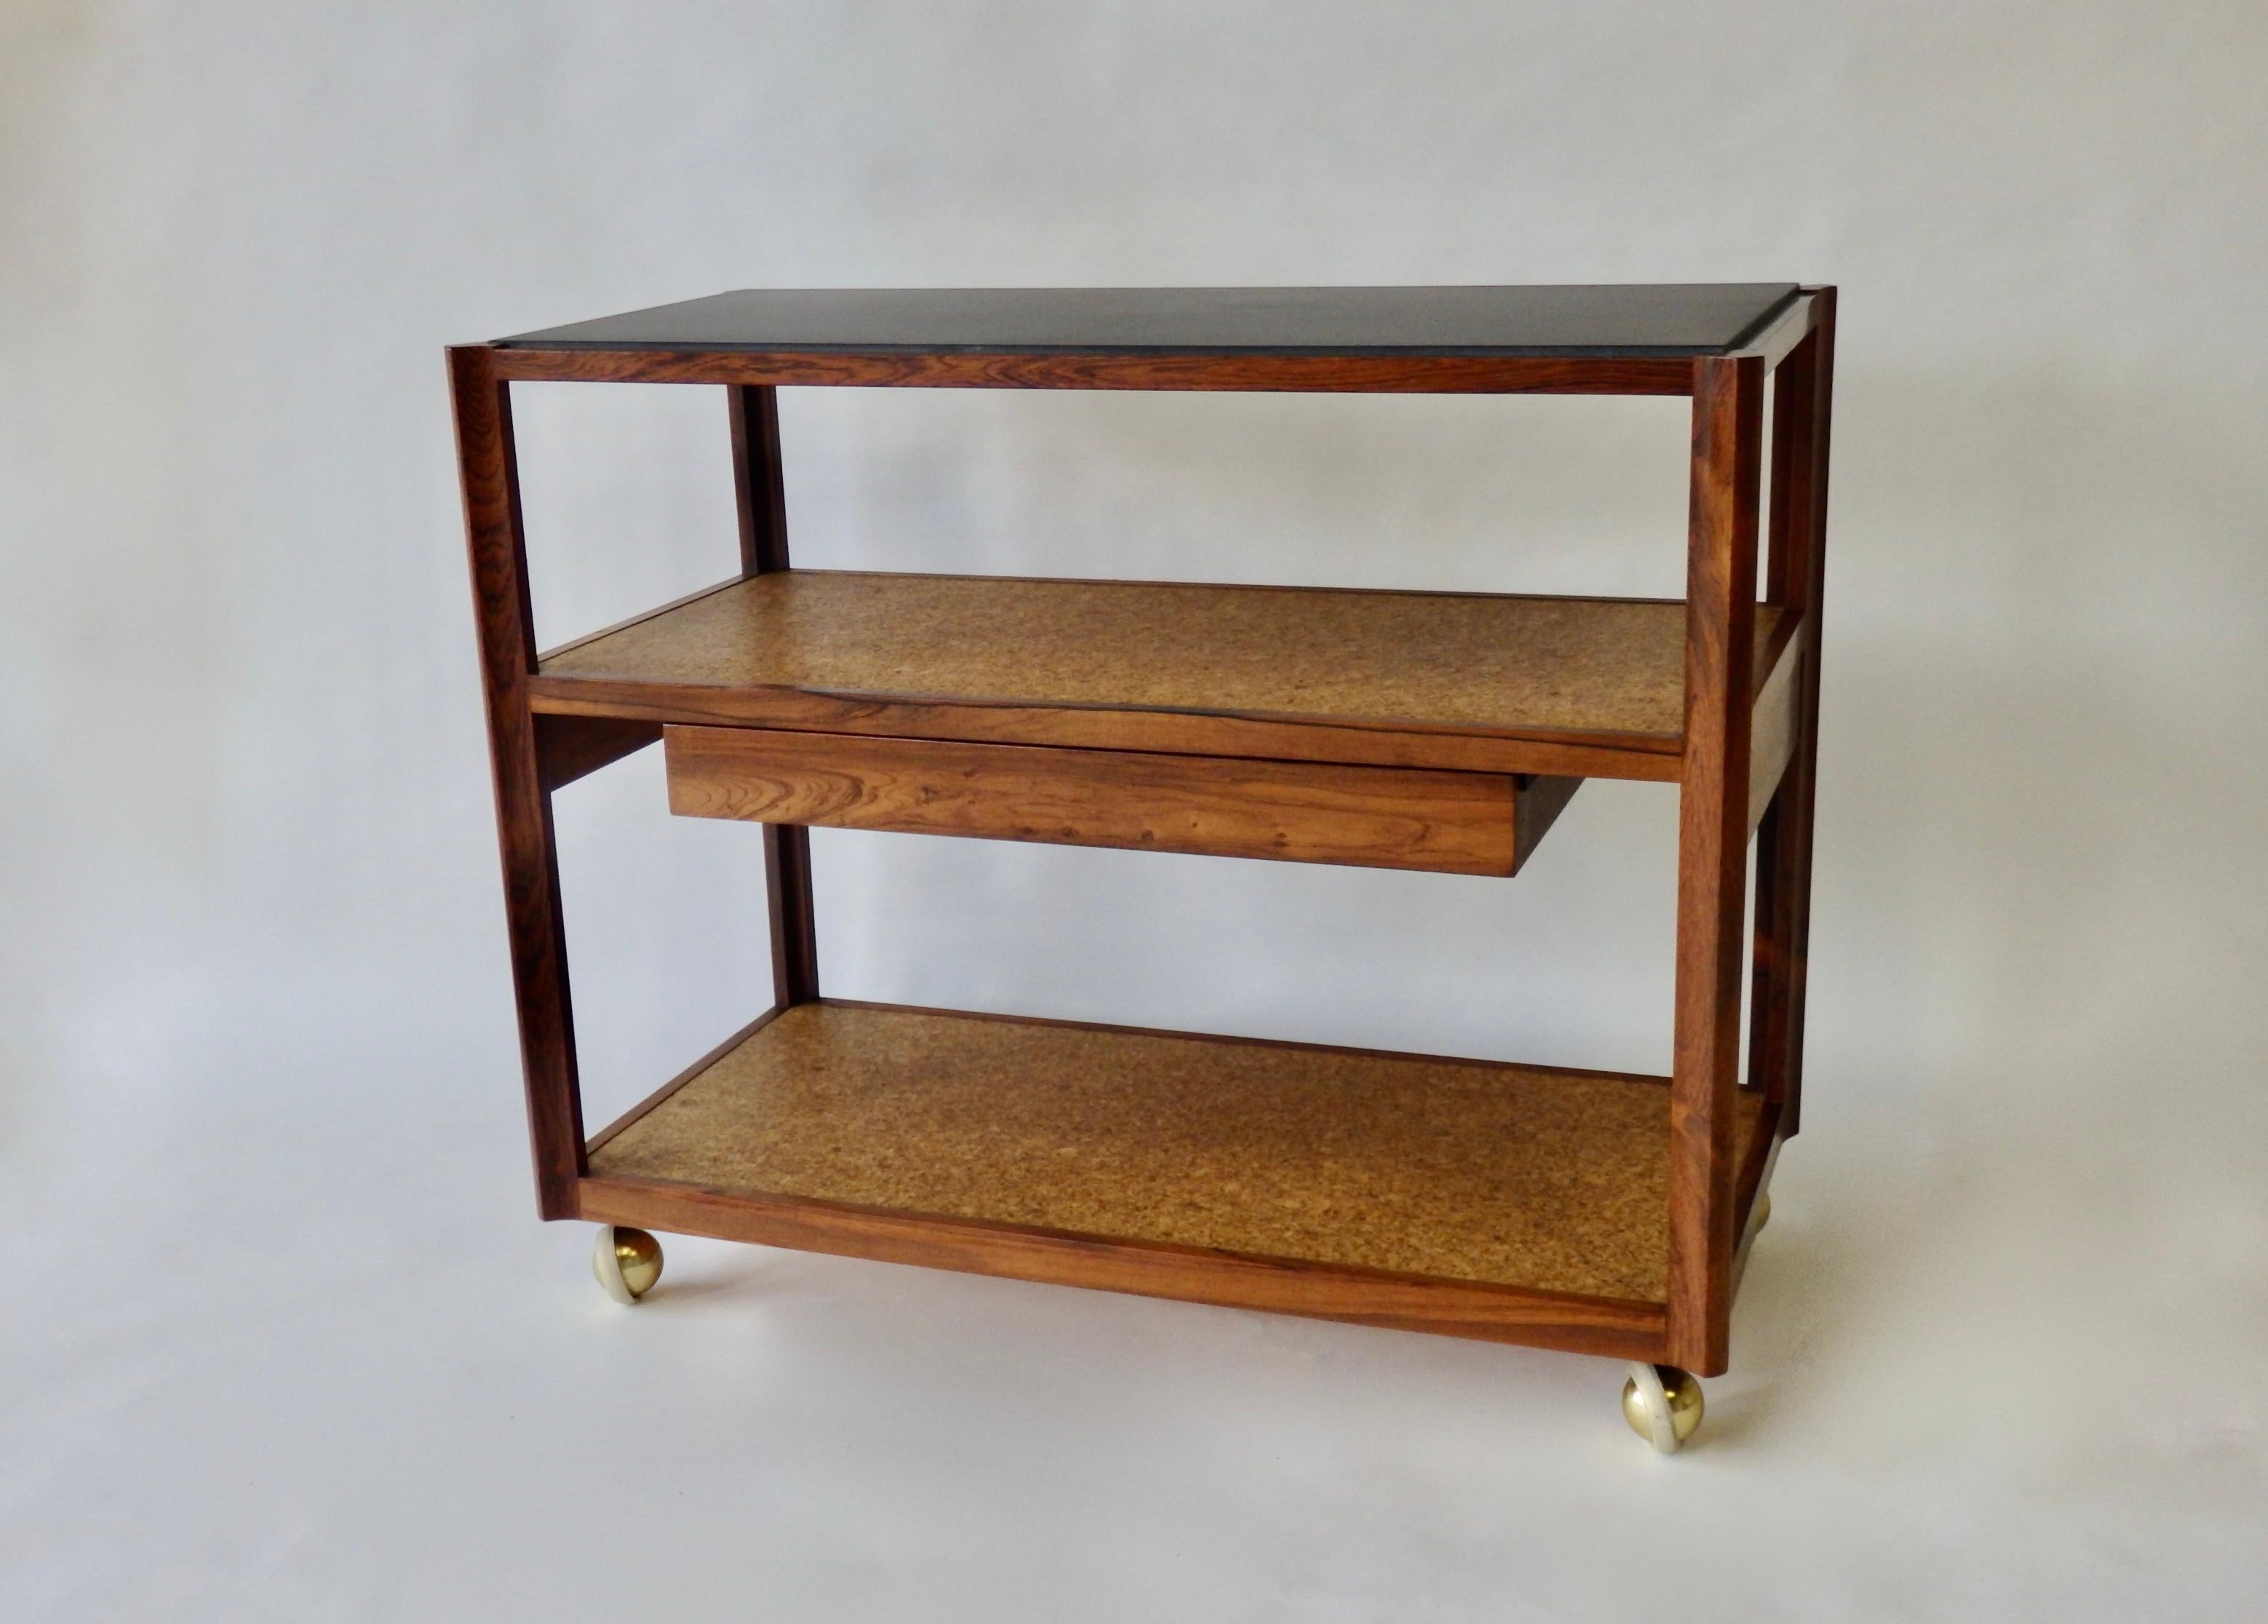 Beautiful Dunbar service or tea cart. Nicely grained rosewood frame supports two cork shelves below slate top. One drawer in mid section shows big D logo. Paper tag remains on underside.